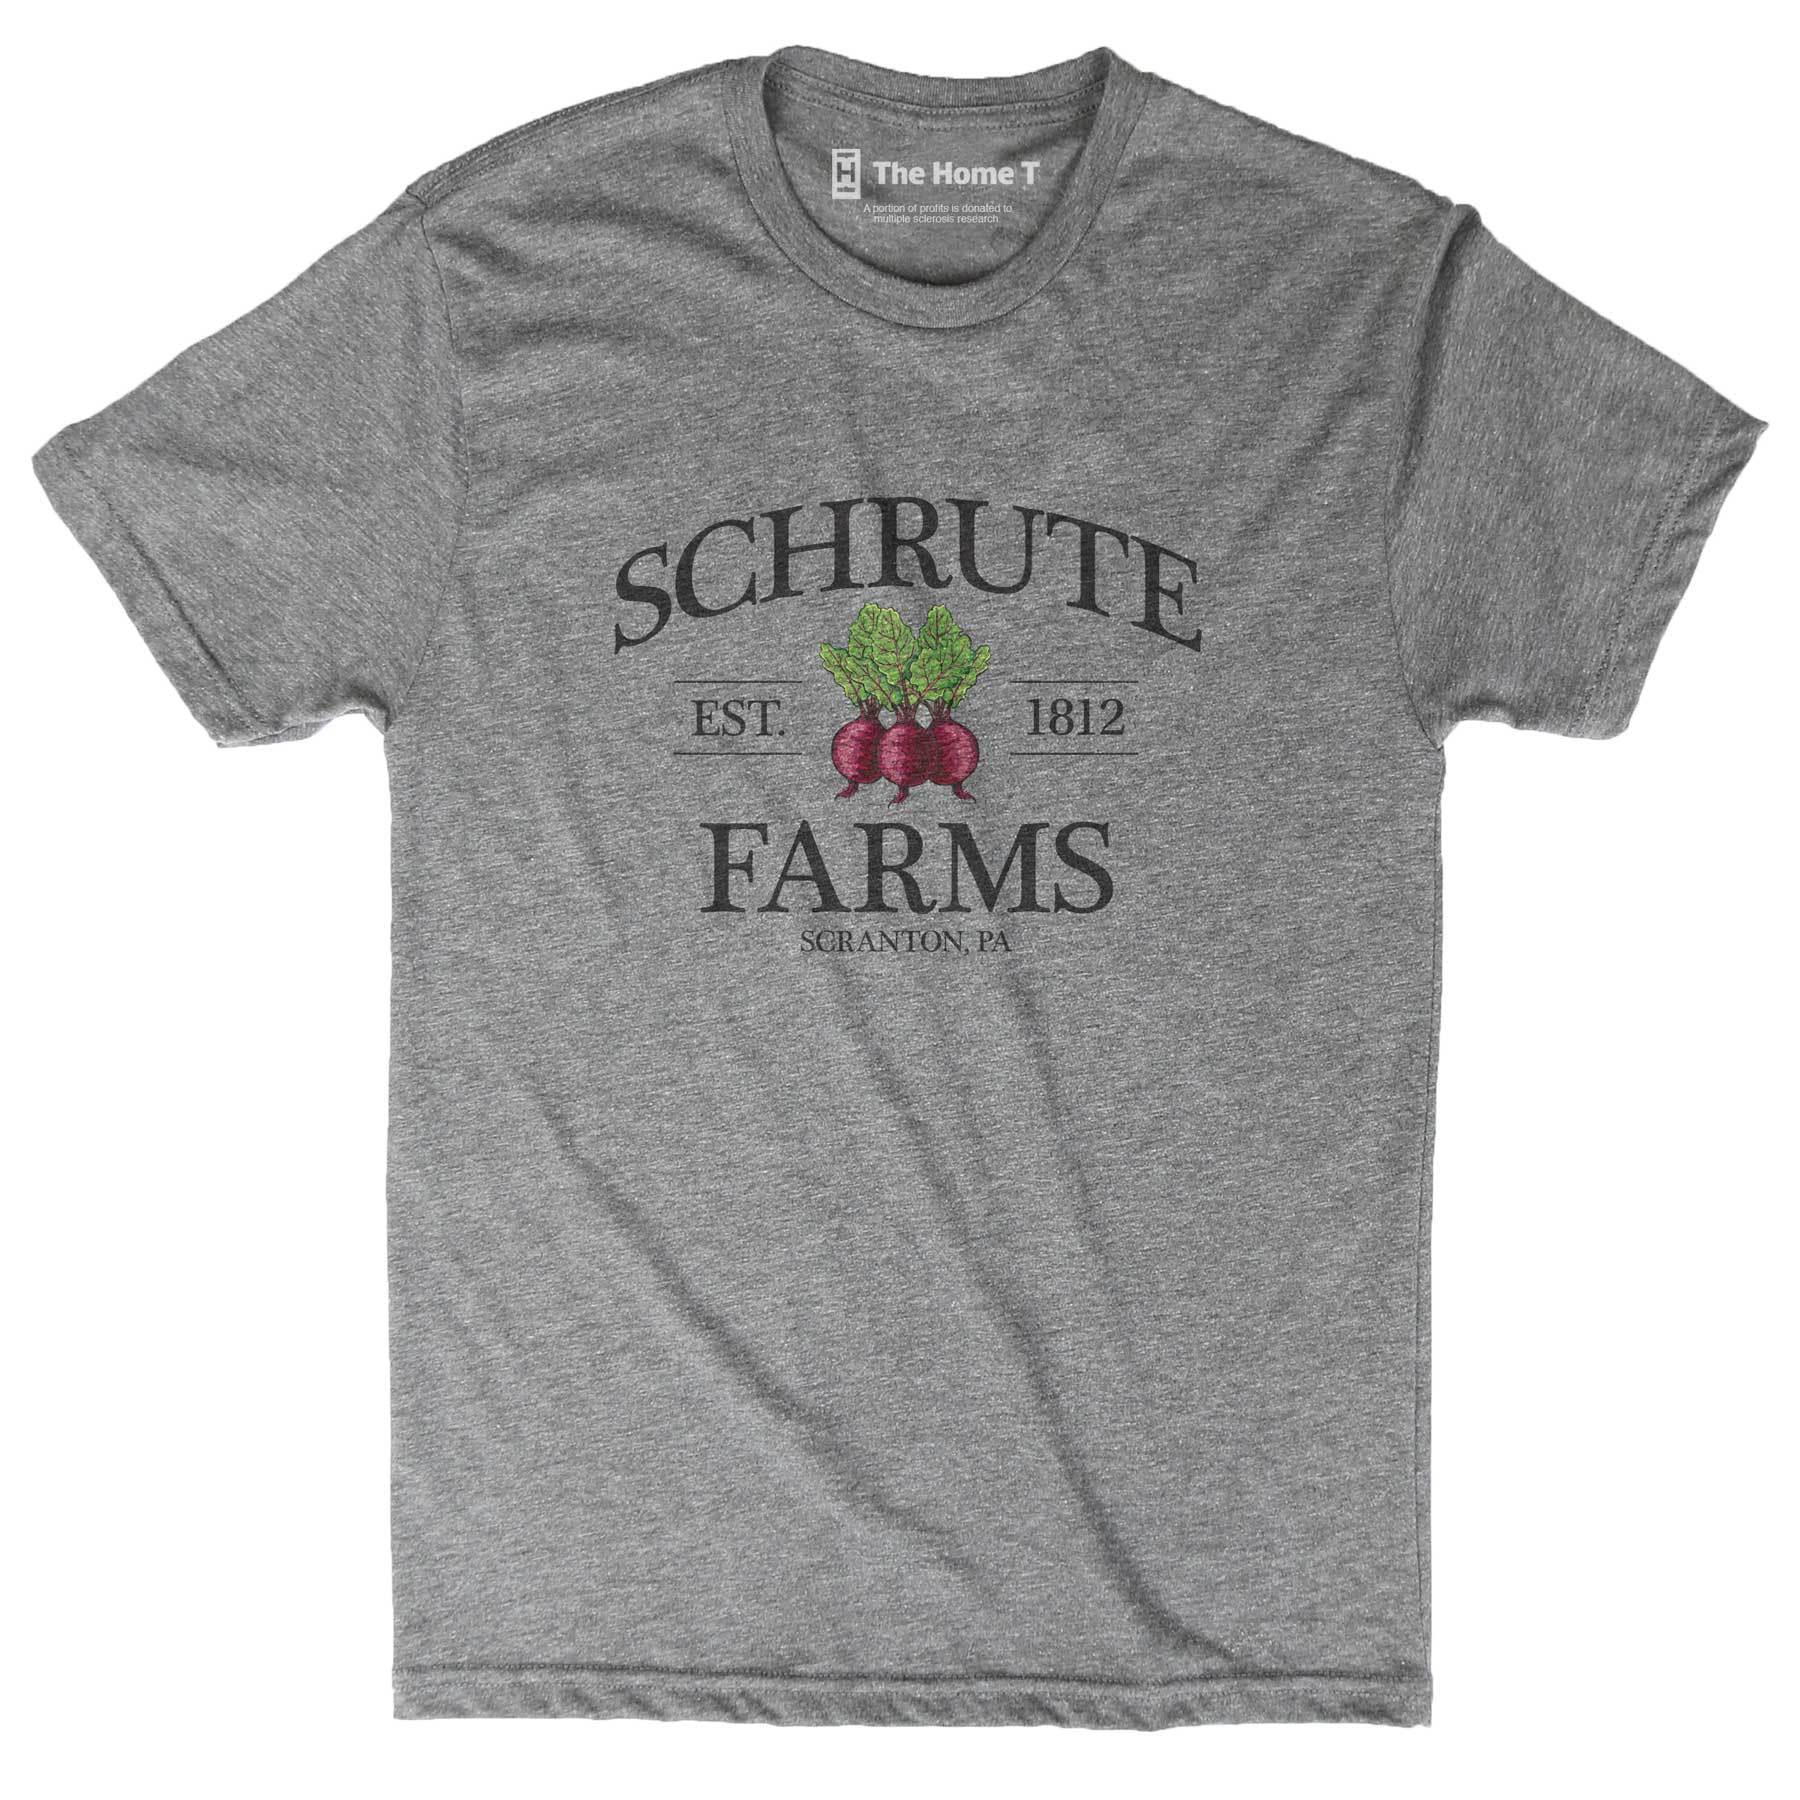 Schrute Farms Beets The Office Custom Basketball Jersey Youth Large